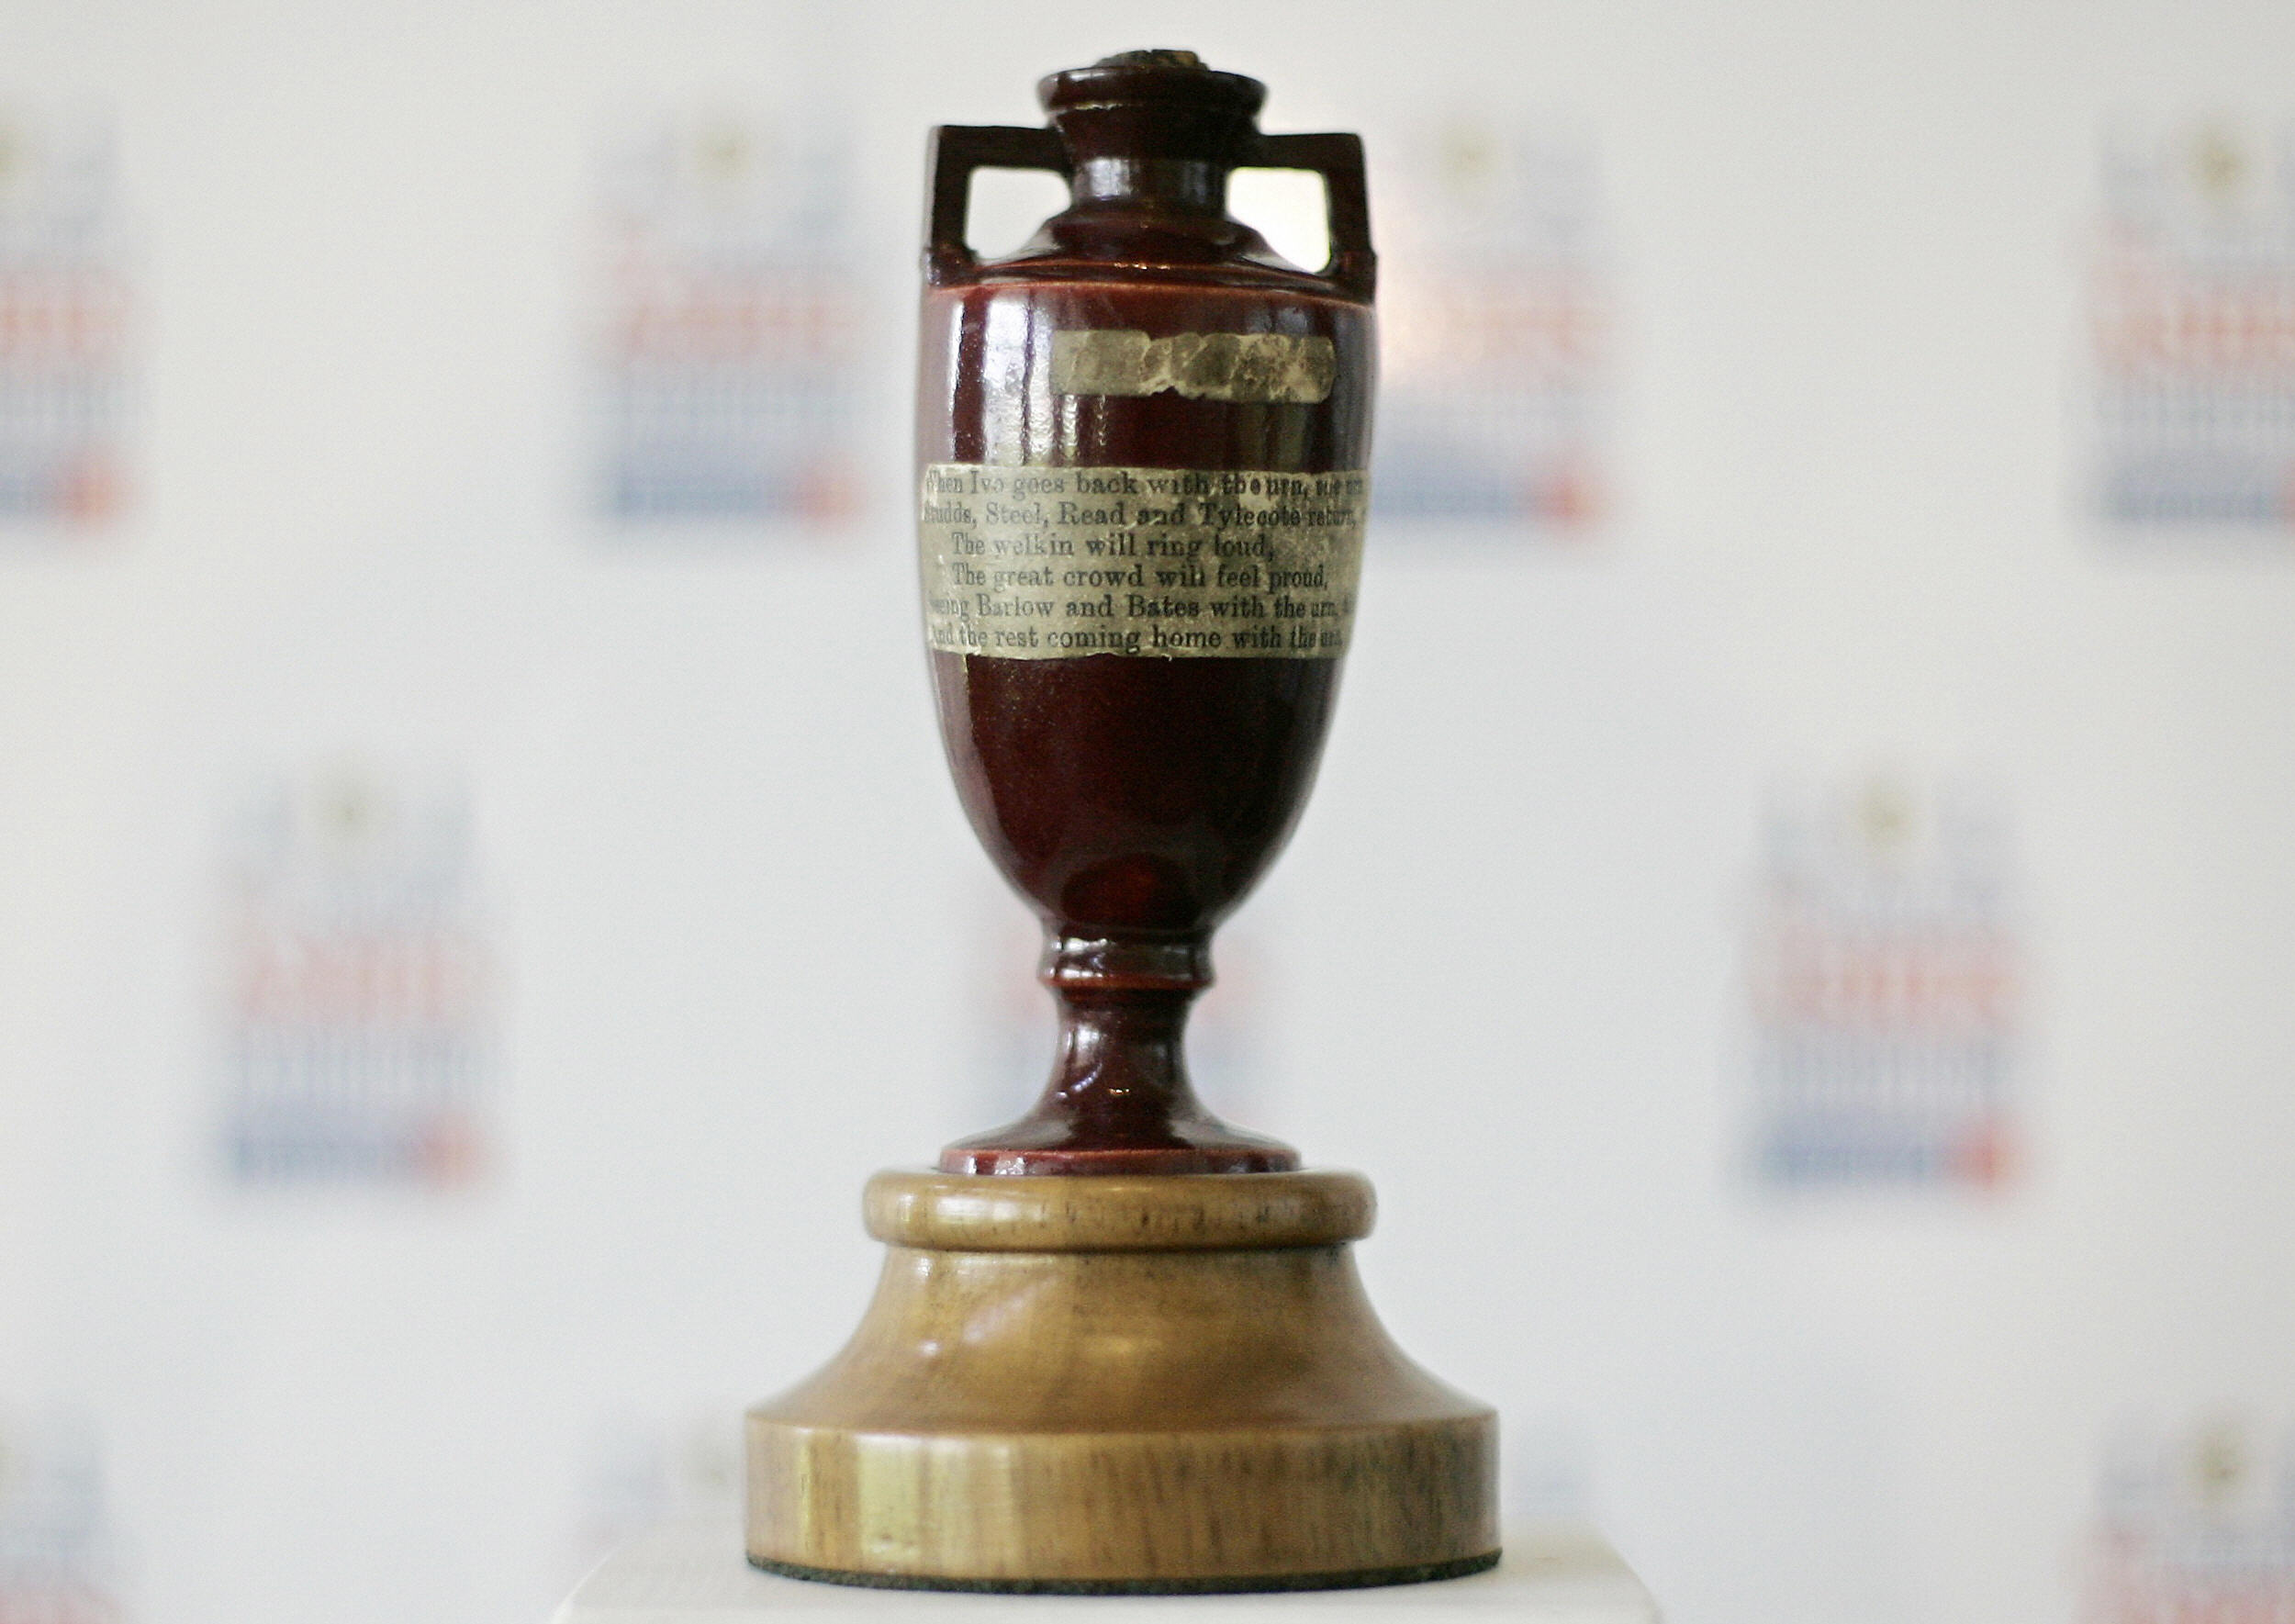 The original cricket 'Ashes Urn' is pict